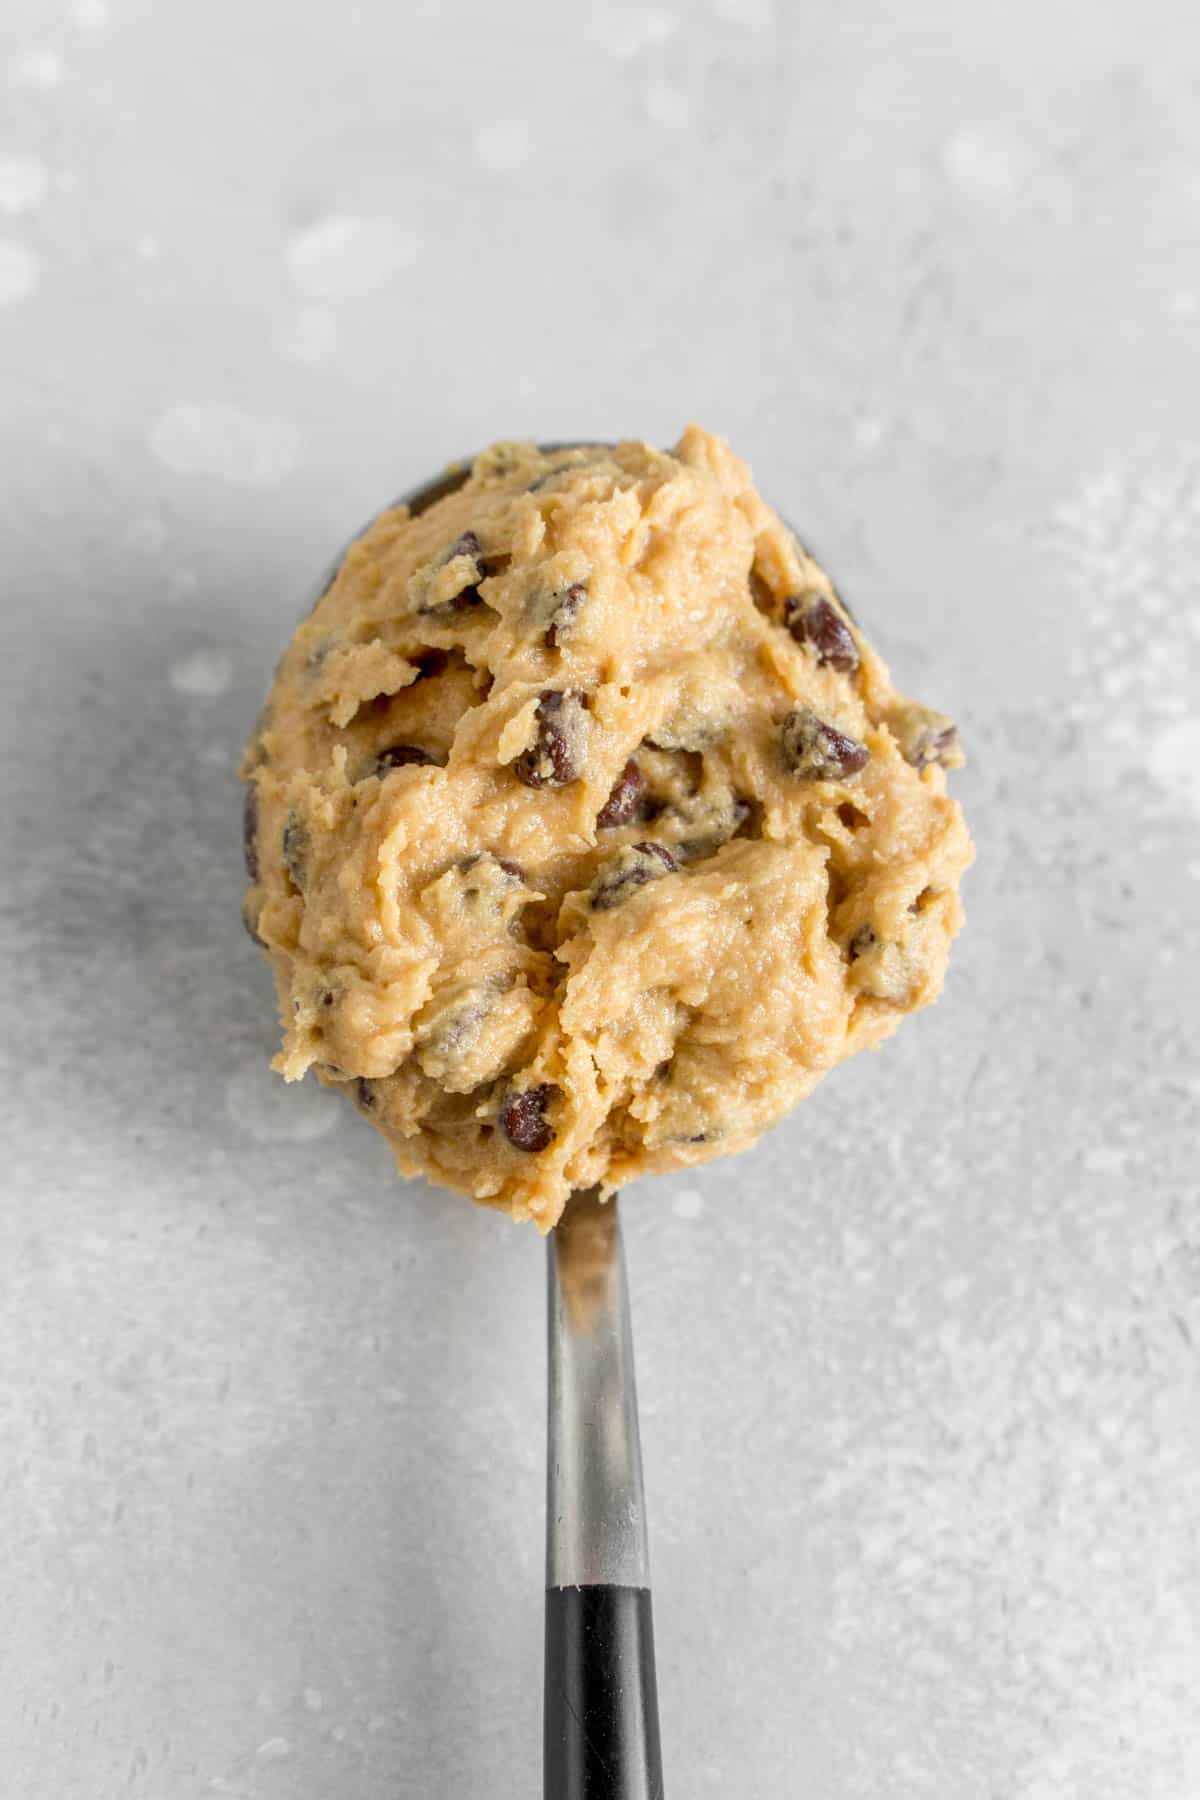 A spoonful of edible cookie dough.